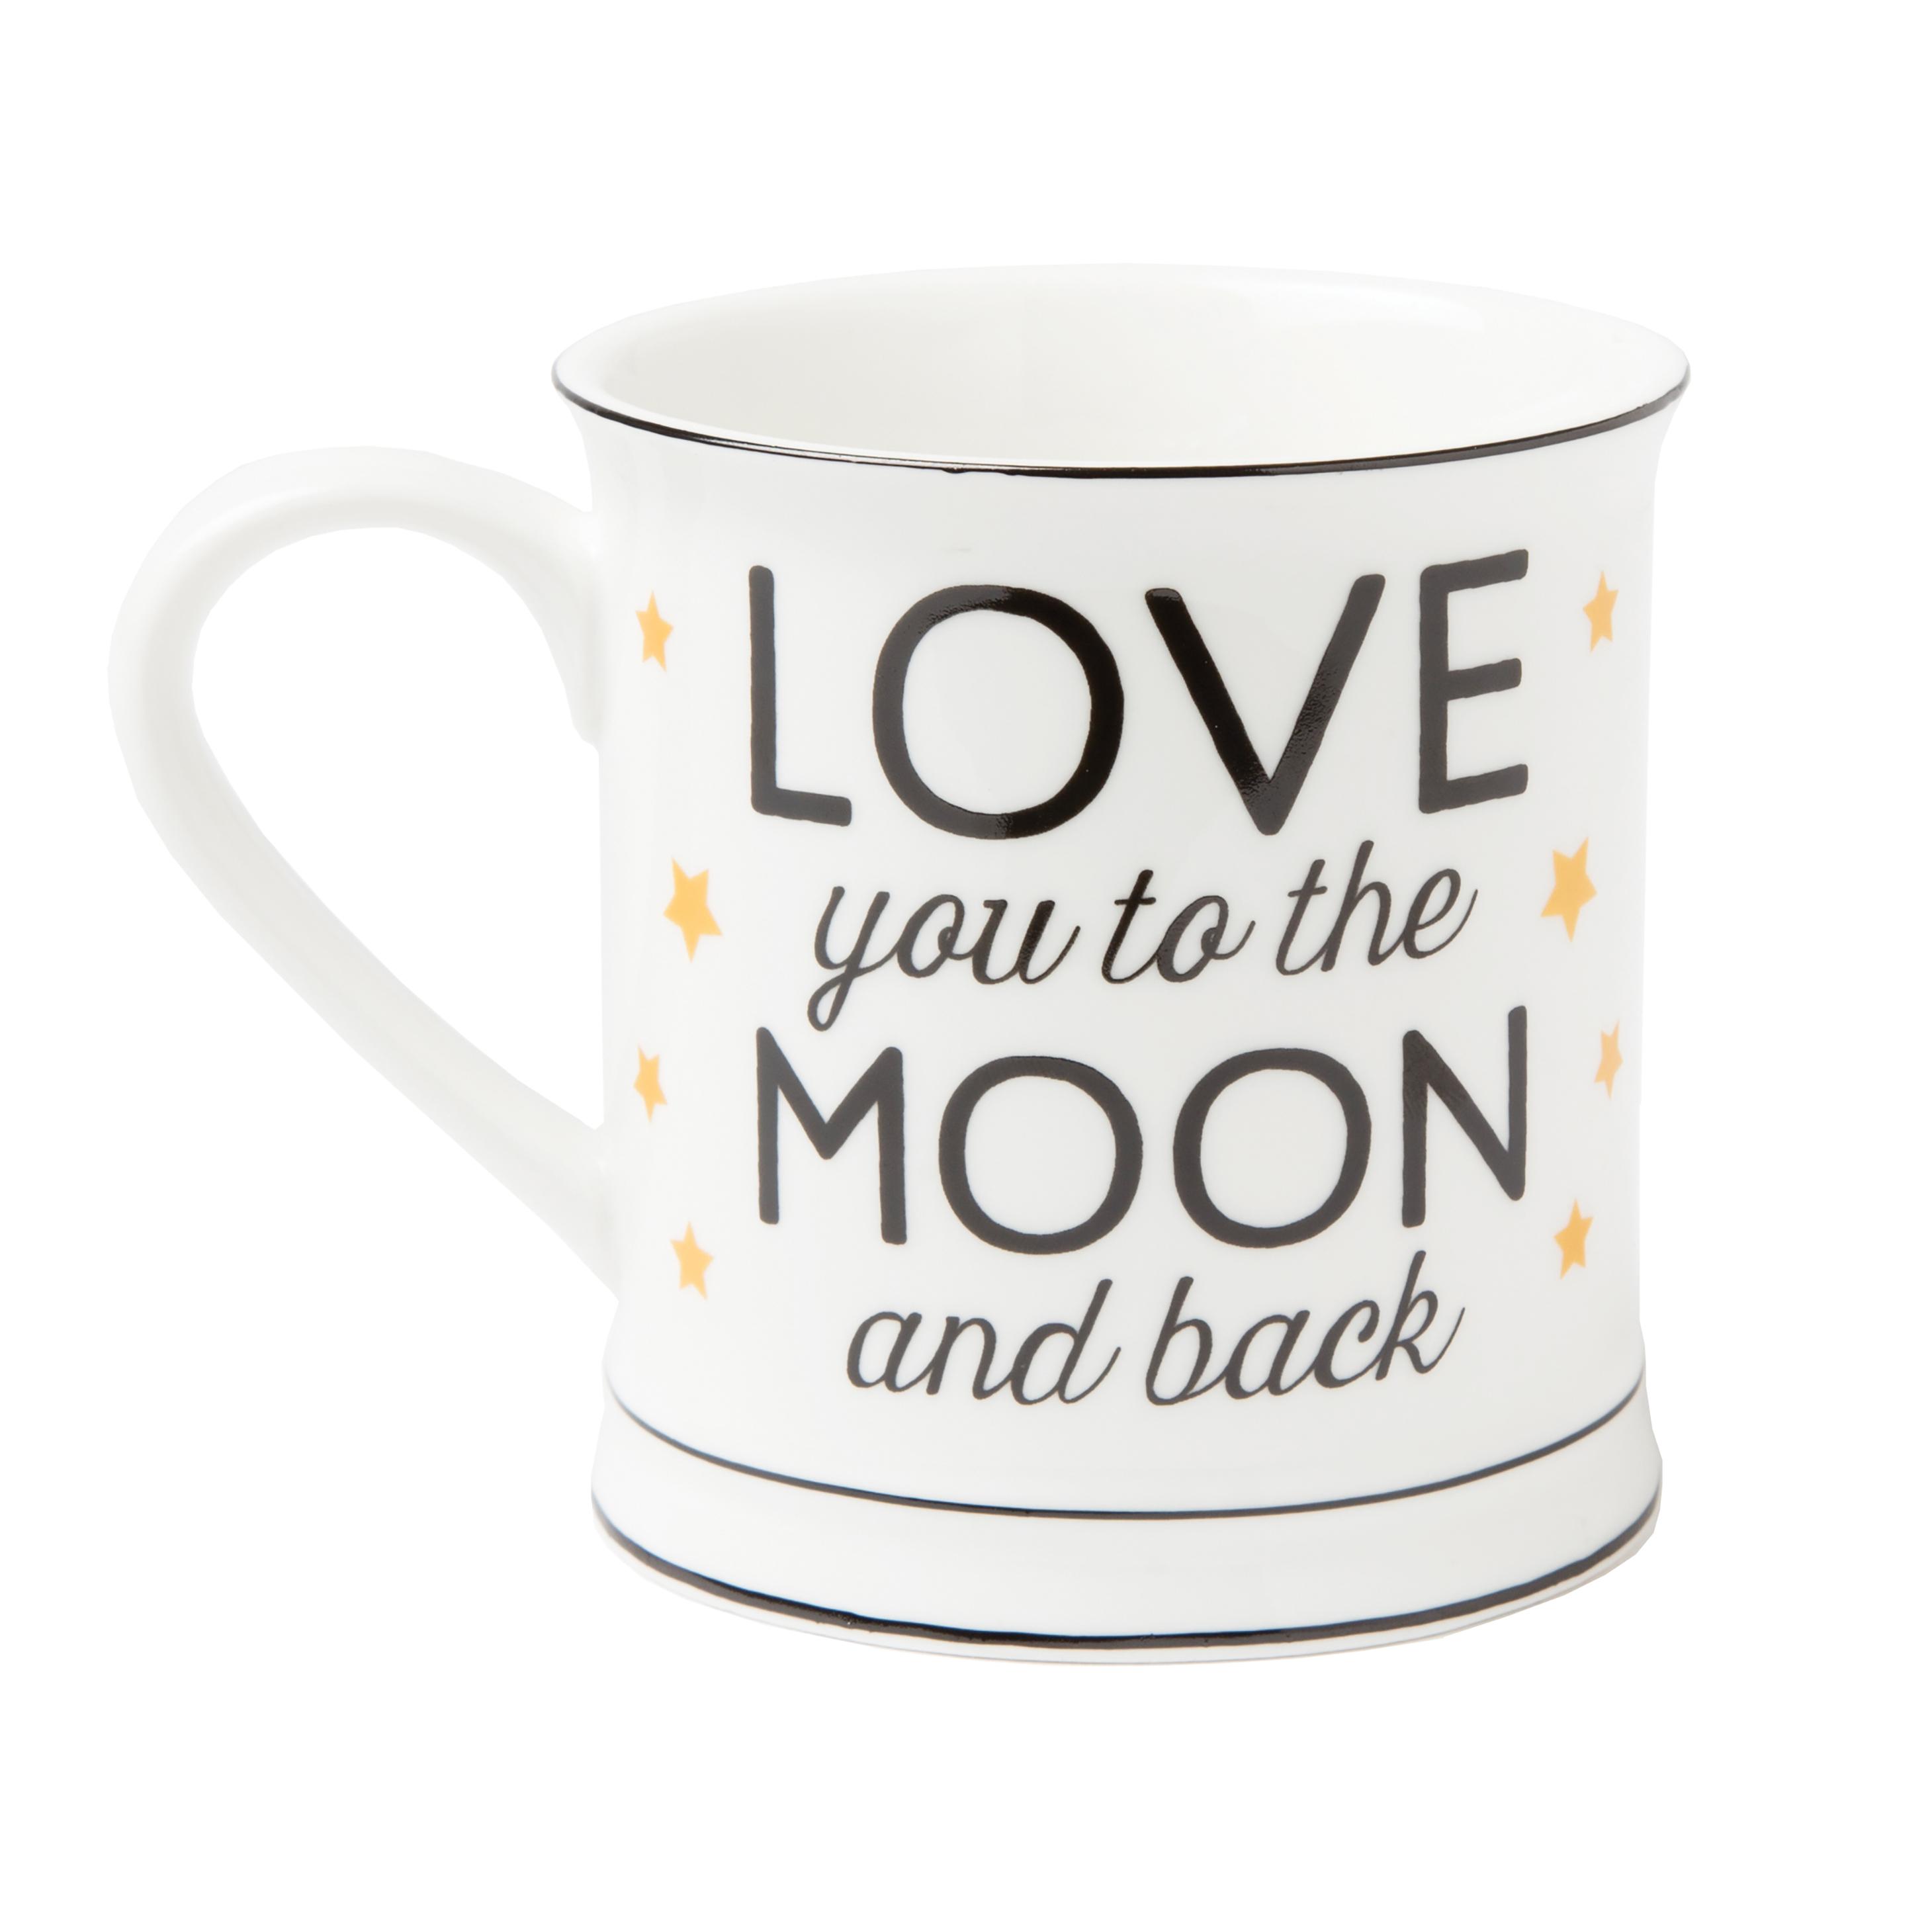 KRUUS LOVE YOU TO THE MOON AND BACK, 350ML